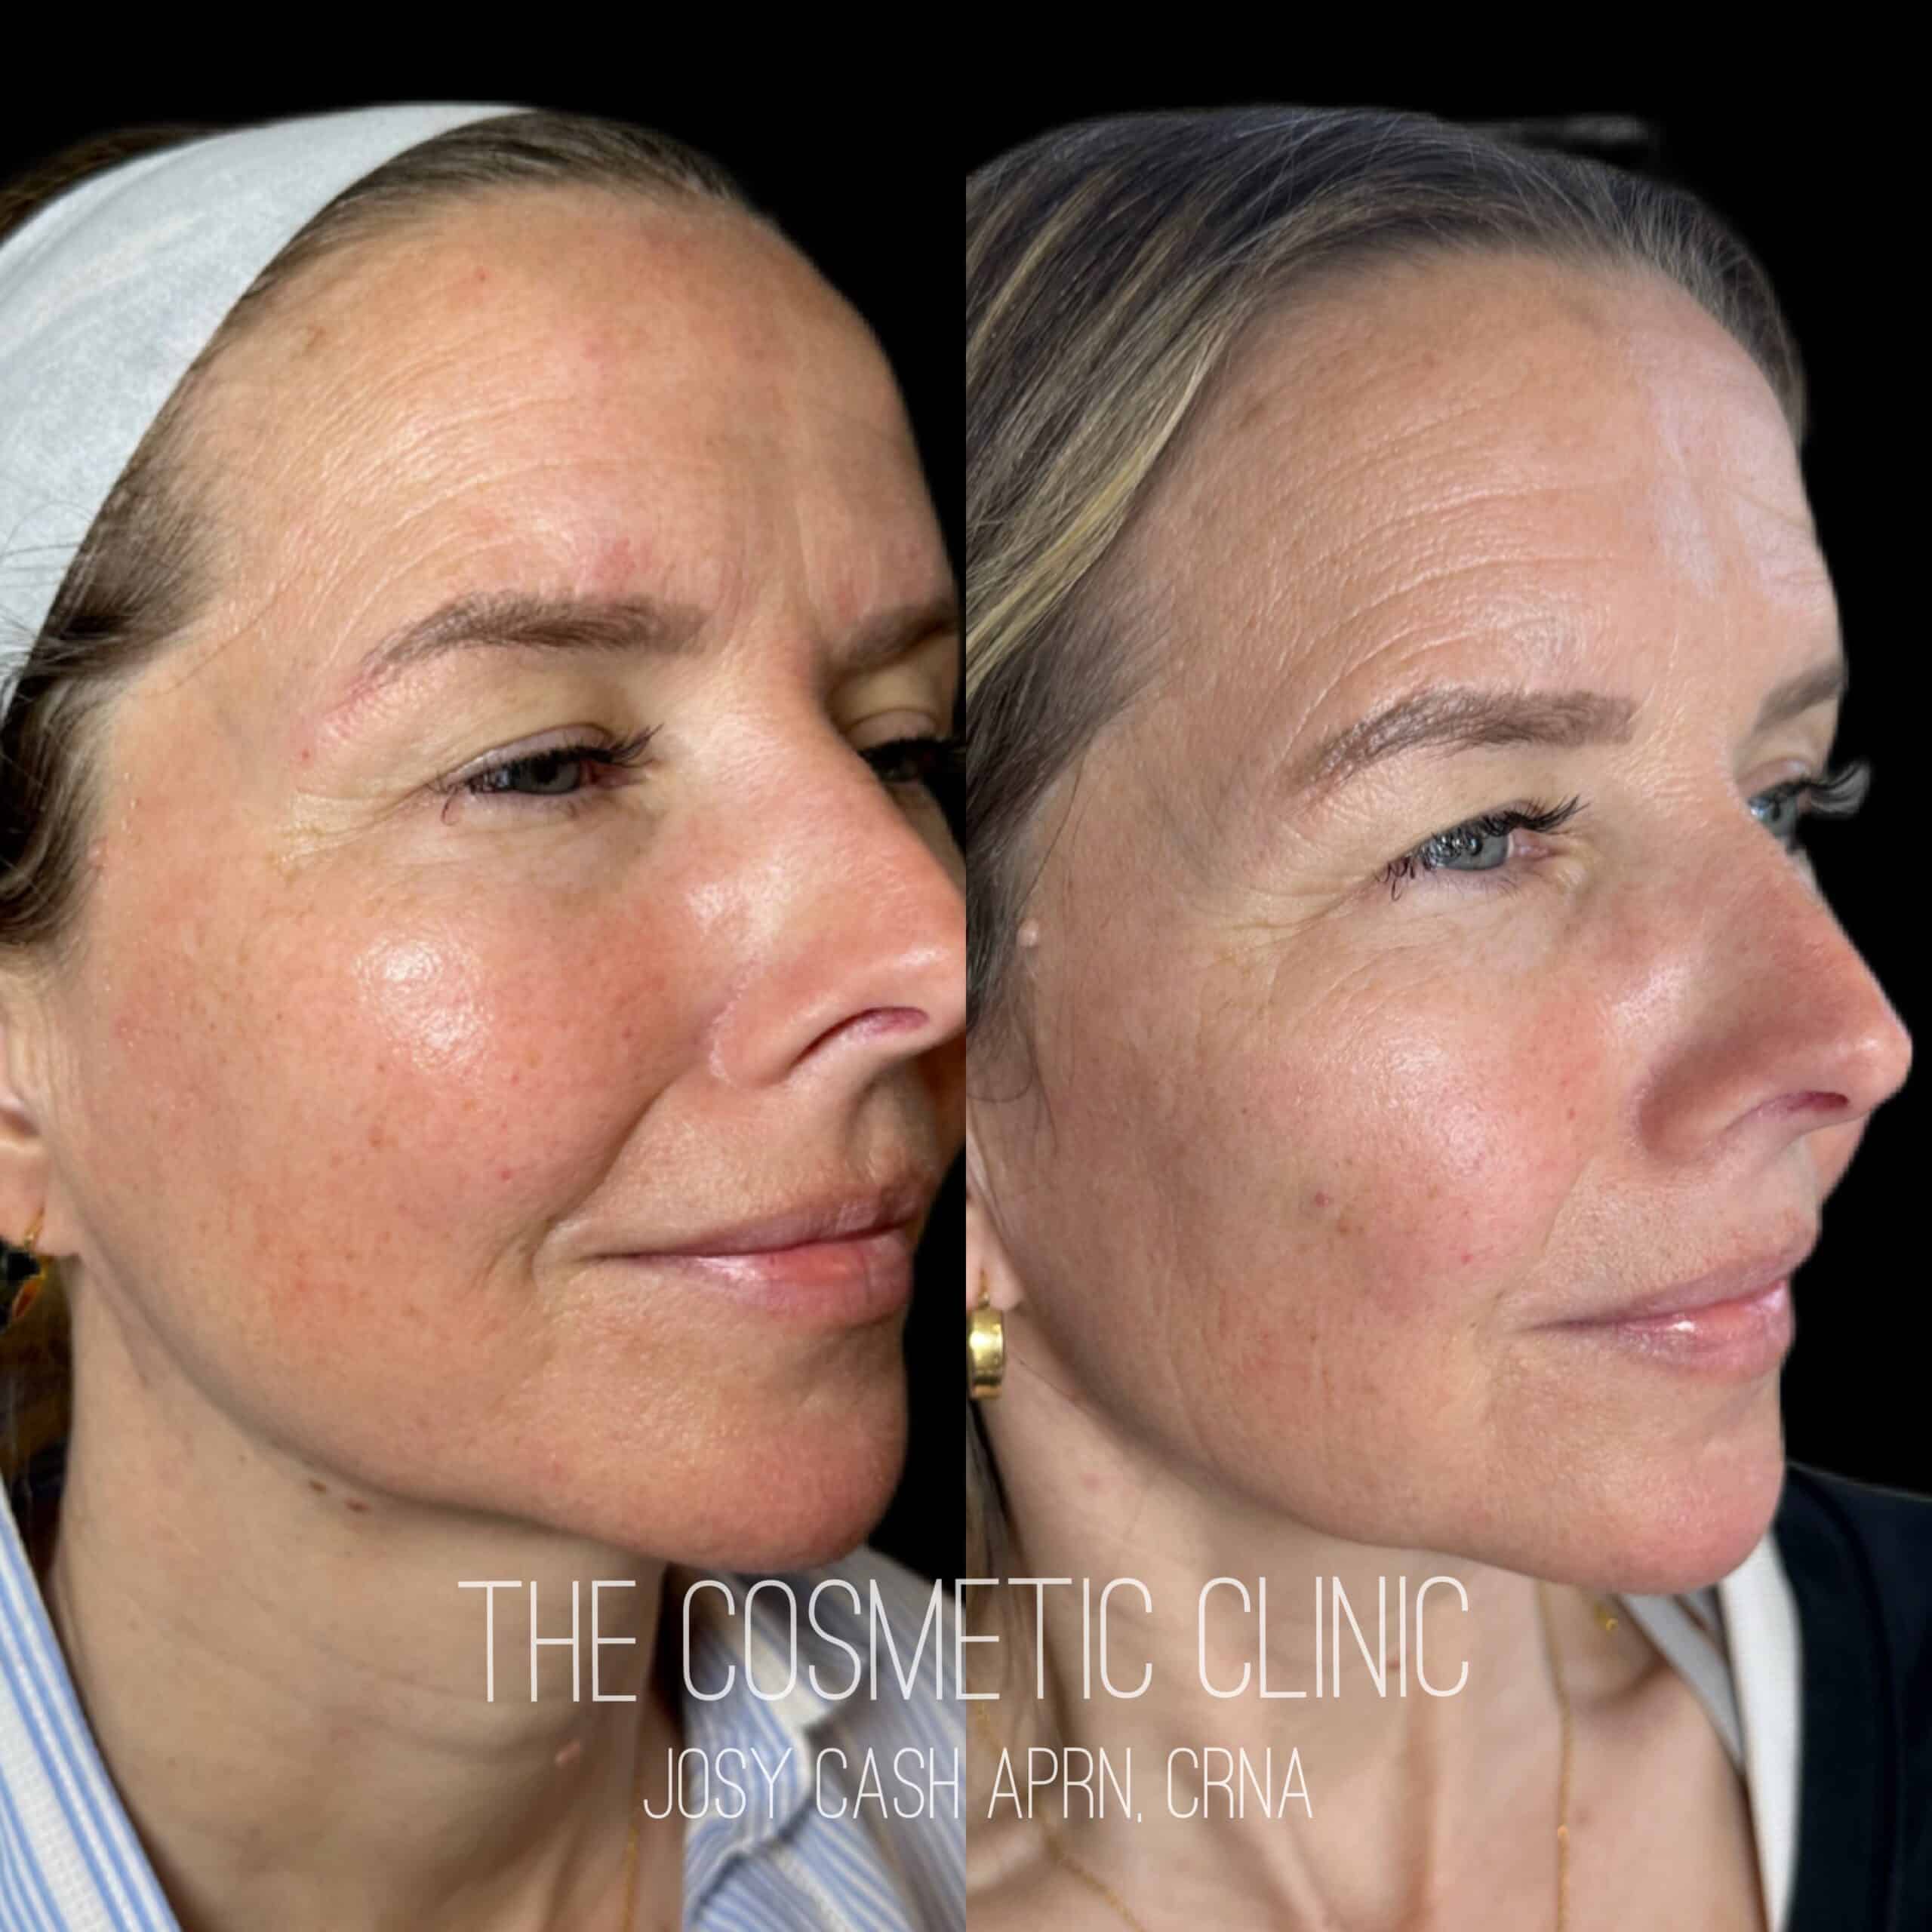 Female Dermal Filler Before and After Photos with The Cosmetic Clinic JOSY CASH APRN,CRNA | The Cosmetic Clinic in Greenwich, CT